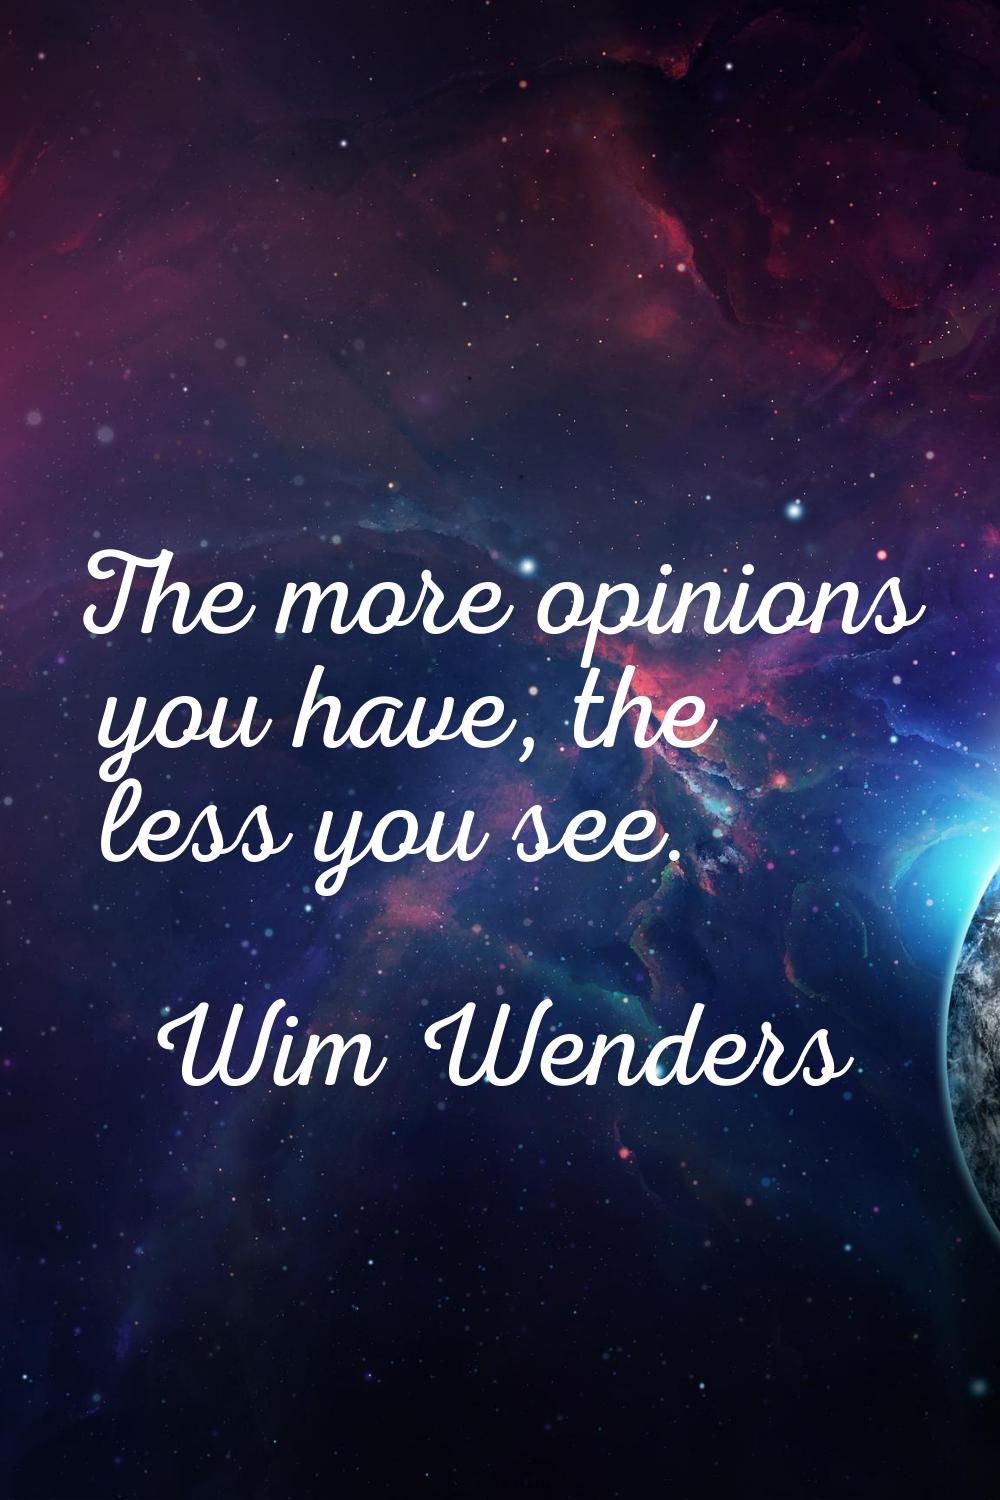 The more opinions you have, the less you see.